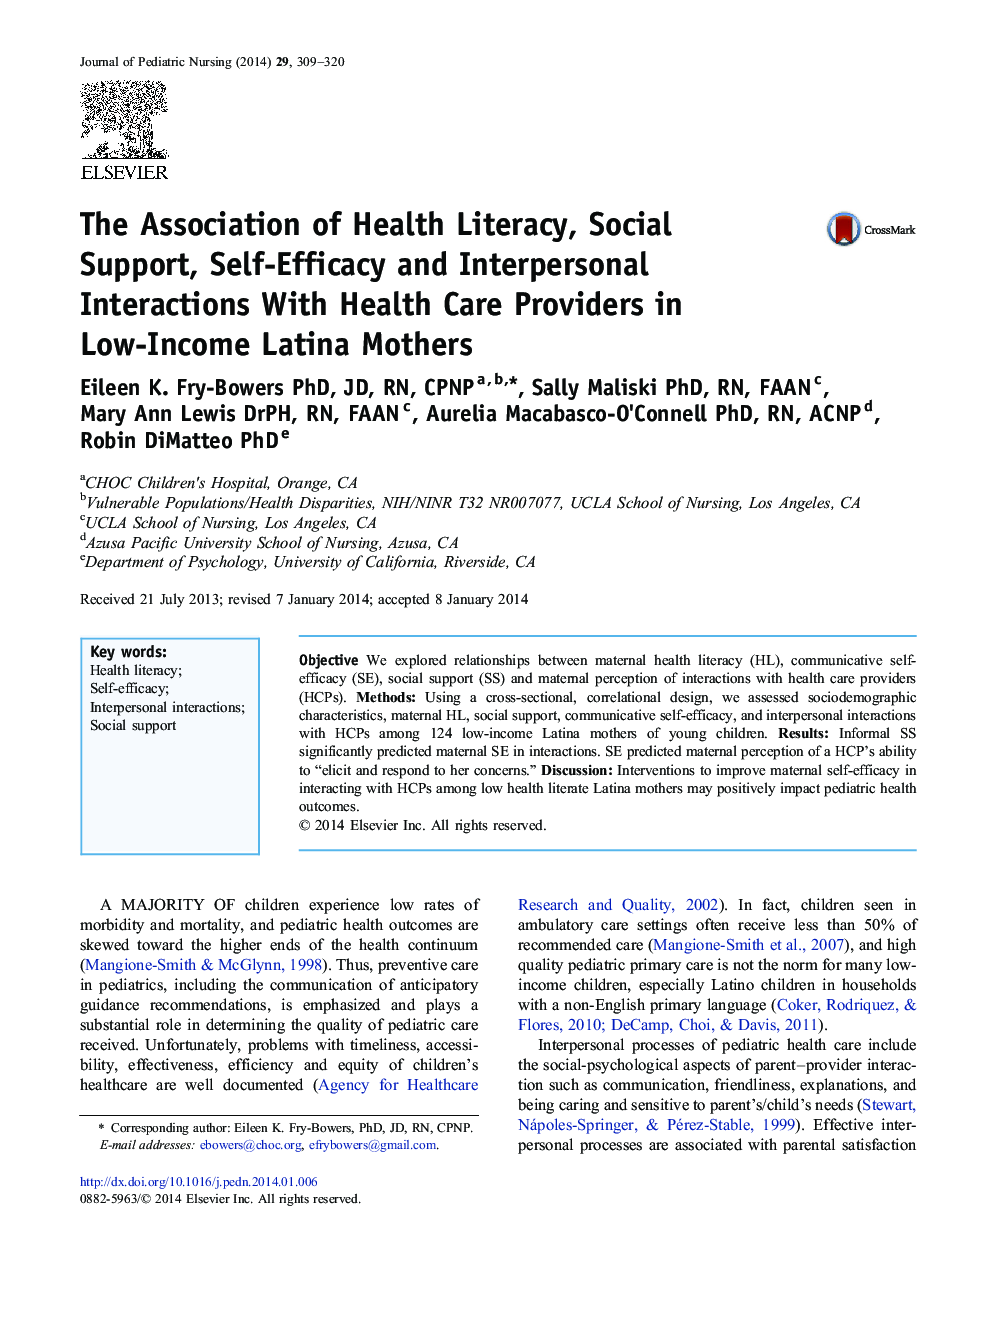 The Association of Health Literacy, Social Support, Self-Efficacy and Interpersonal Interactions With Health Care Providers in Low-Income Latina Mothers